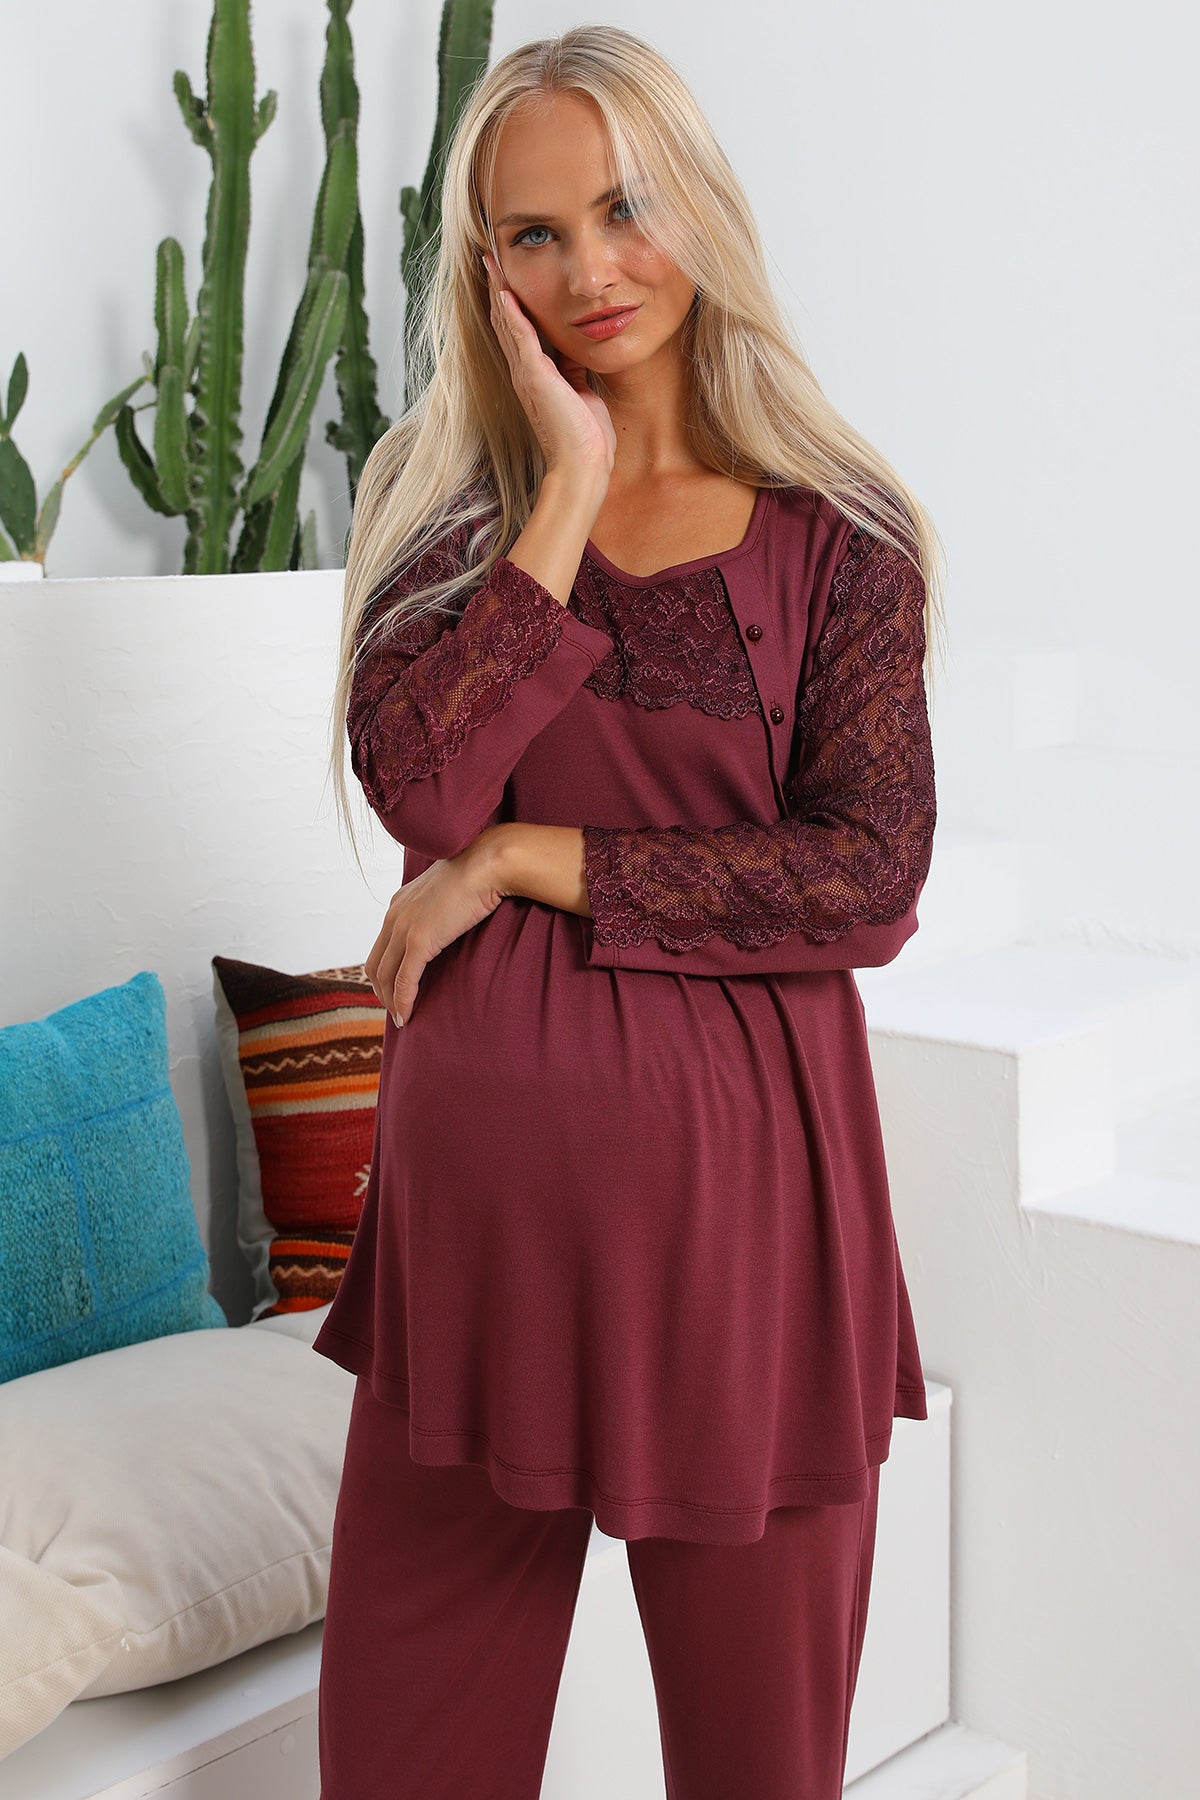 Shopymommy 55703 Elegance Lace Sleeves 3-Pieces Maternity & Nursing Pajamas With Welsoft Robe Plum